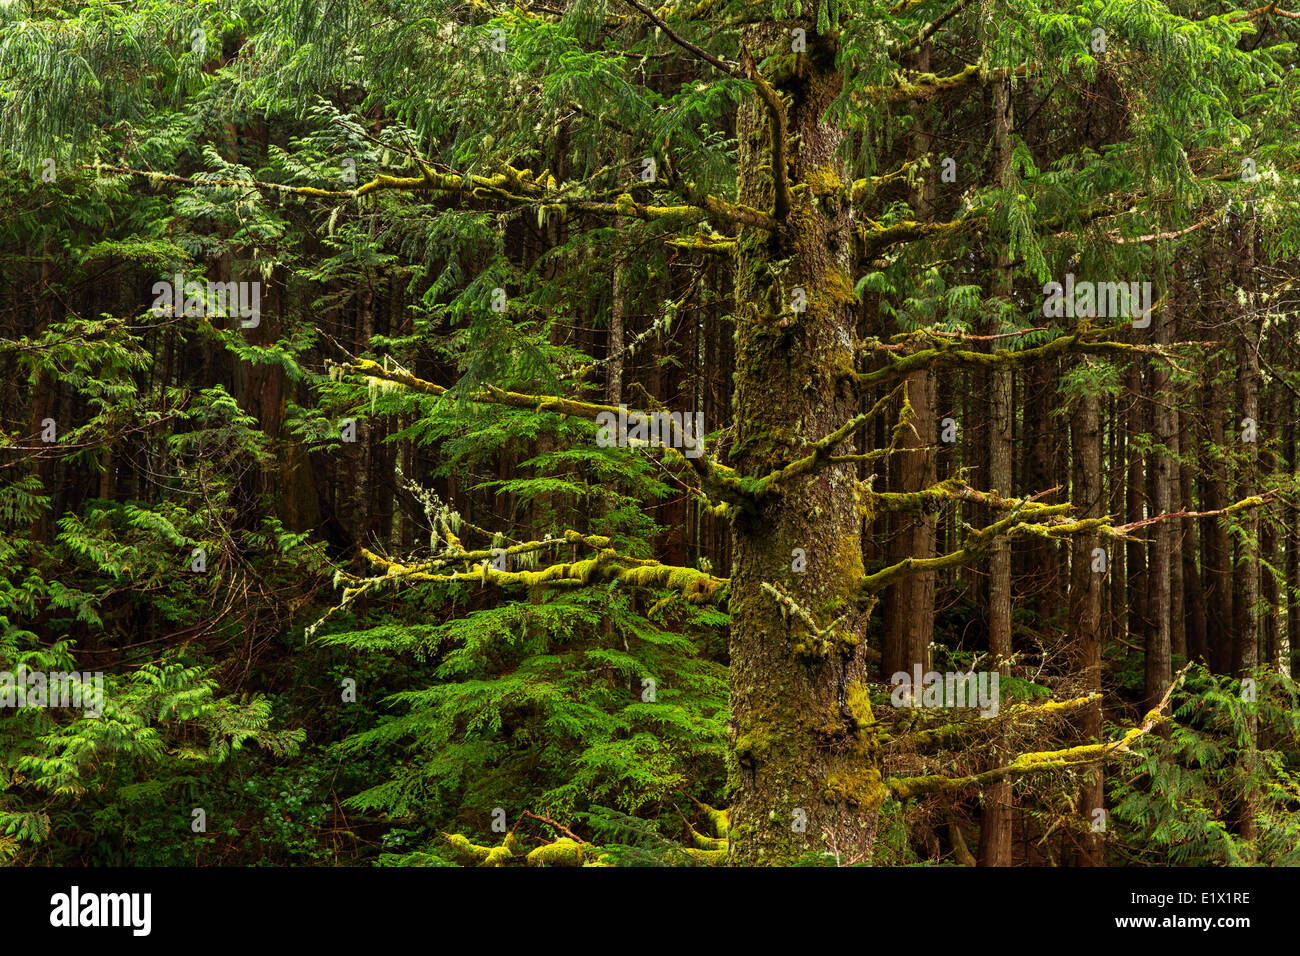 Trees and foliage around Tofino, British Columbia, Canada.. Douglas fir and cedar trees dominate the forest here. Stock Photo